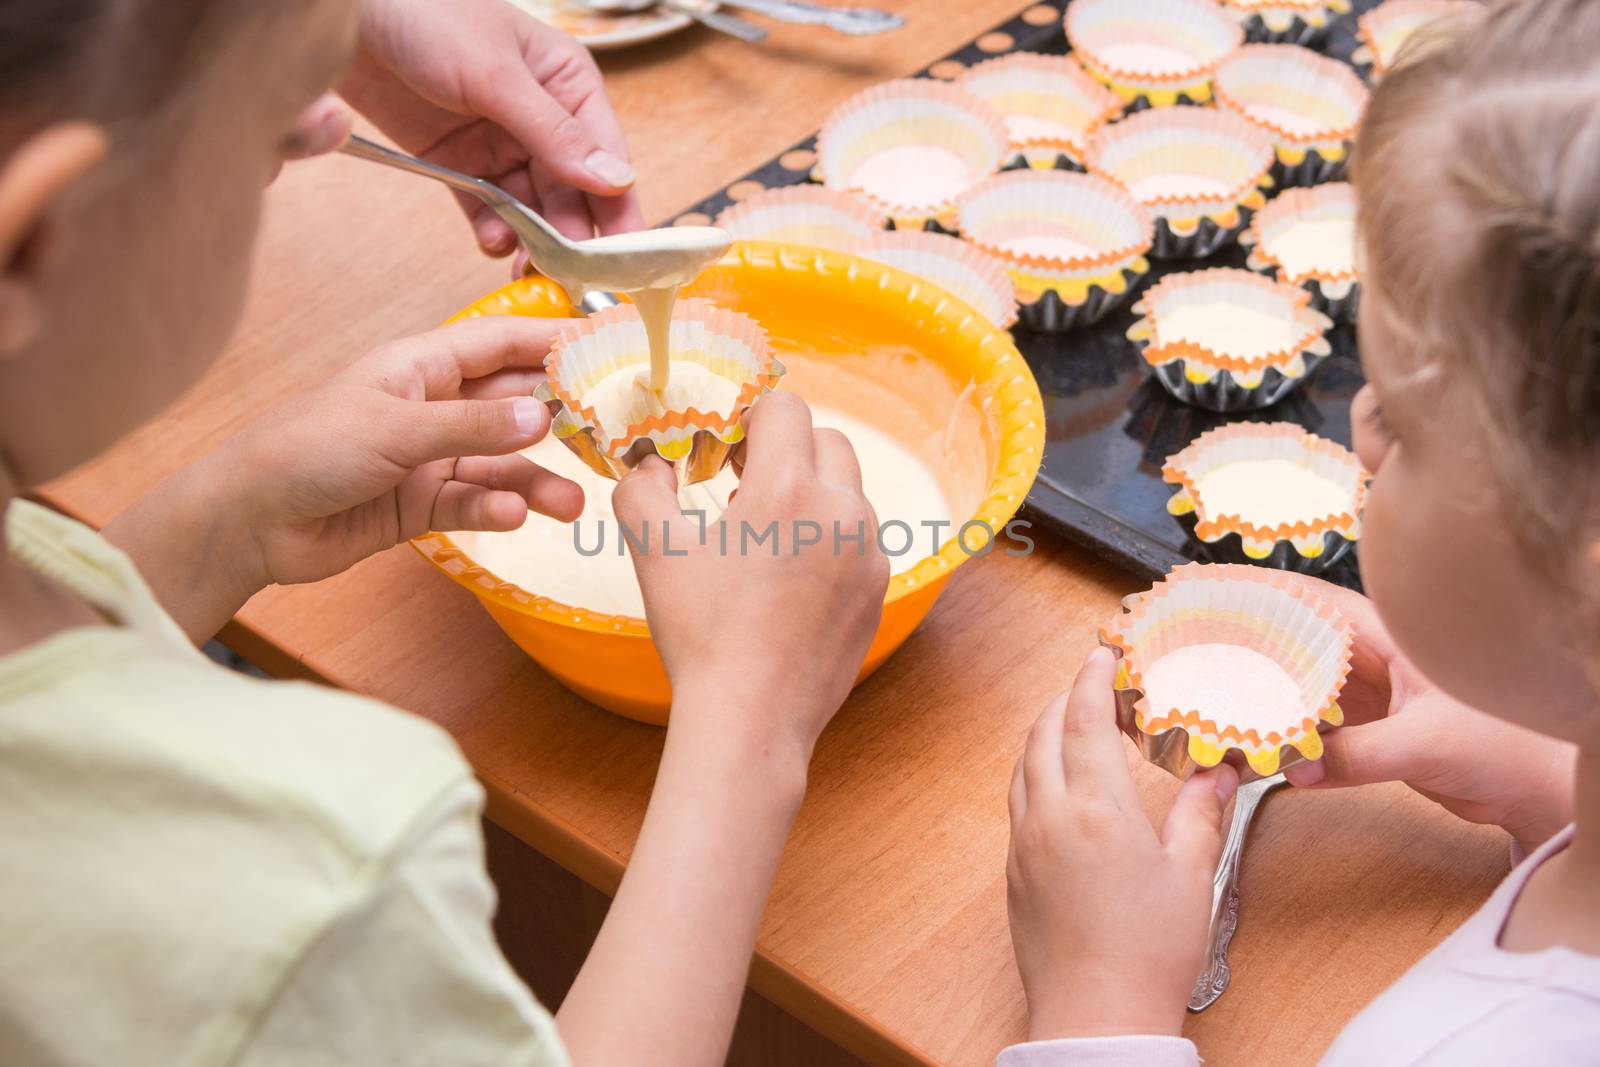 Two girls helped mom to pour batter into the molds for cupcakes by Madhourse